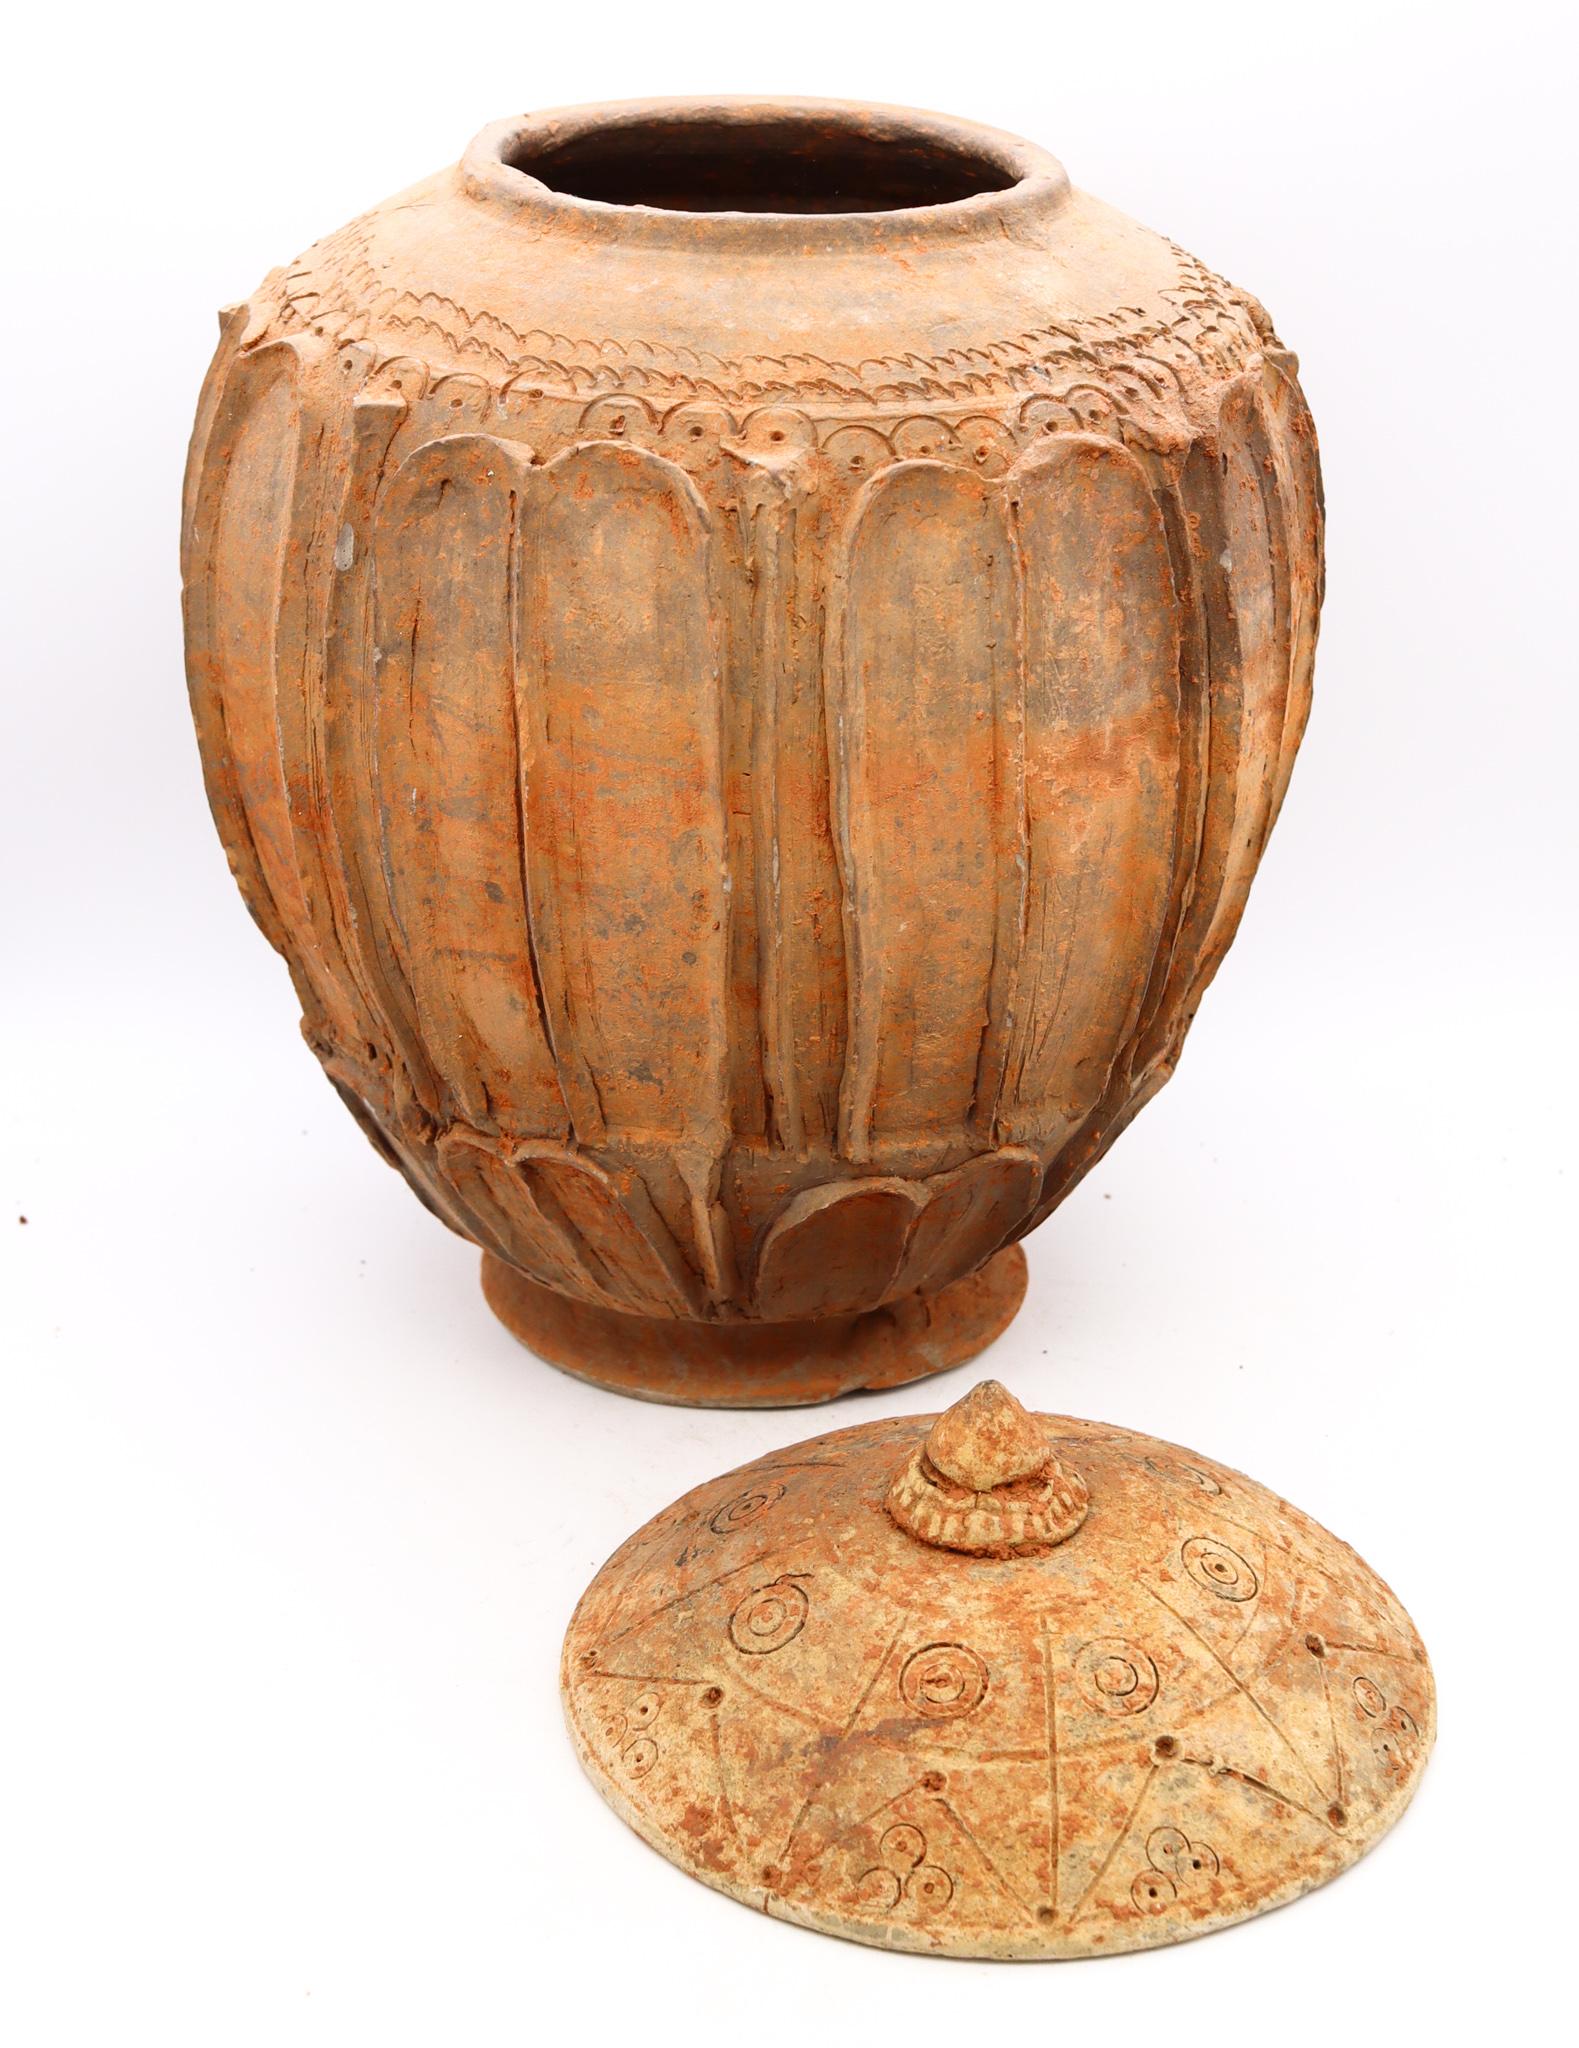 China 618-907 AD Tang Dynasty Period Pottery Offering Covered Vessel with Lotus  In Good Condition For Sale In Miami, FL